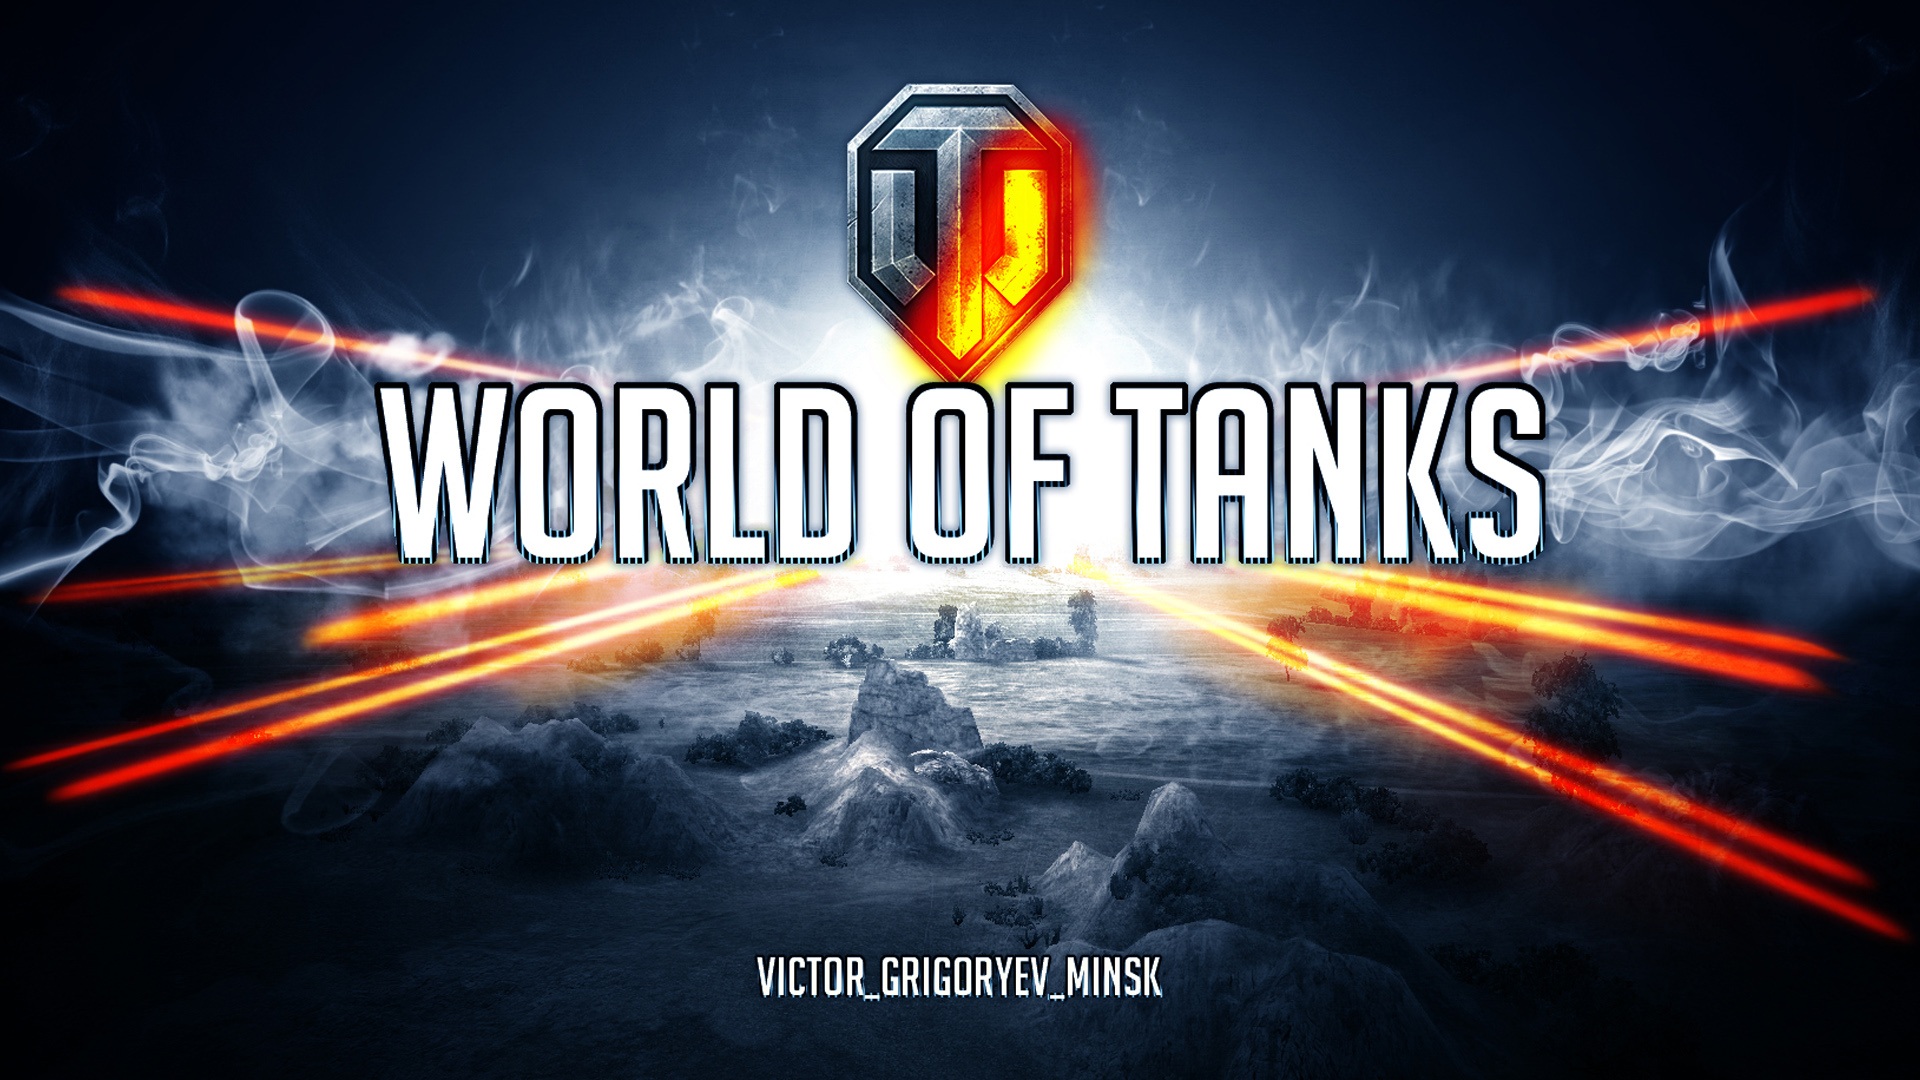 Wallpaper World of Tanks wide 1920x1080 Full HD 2K Picture Image